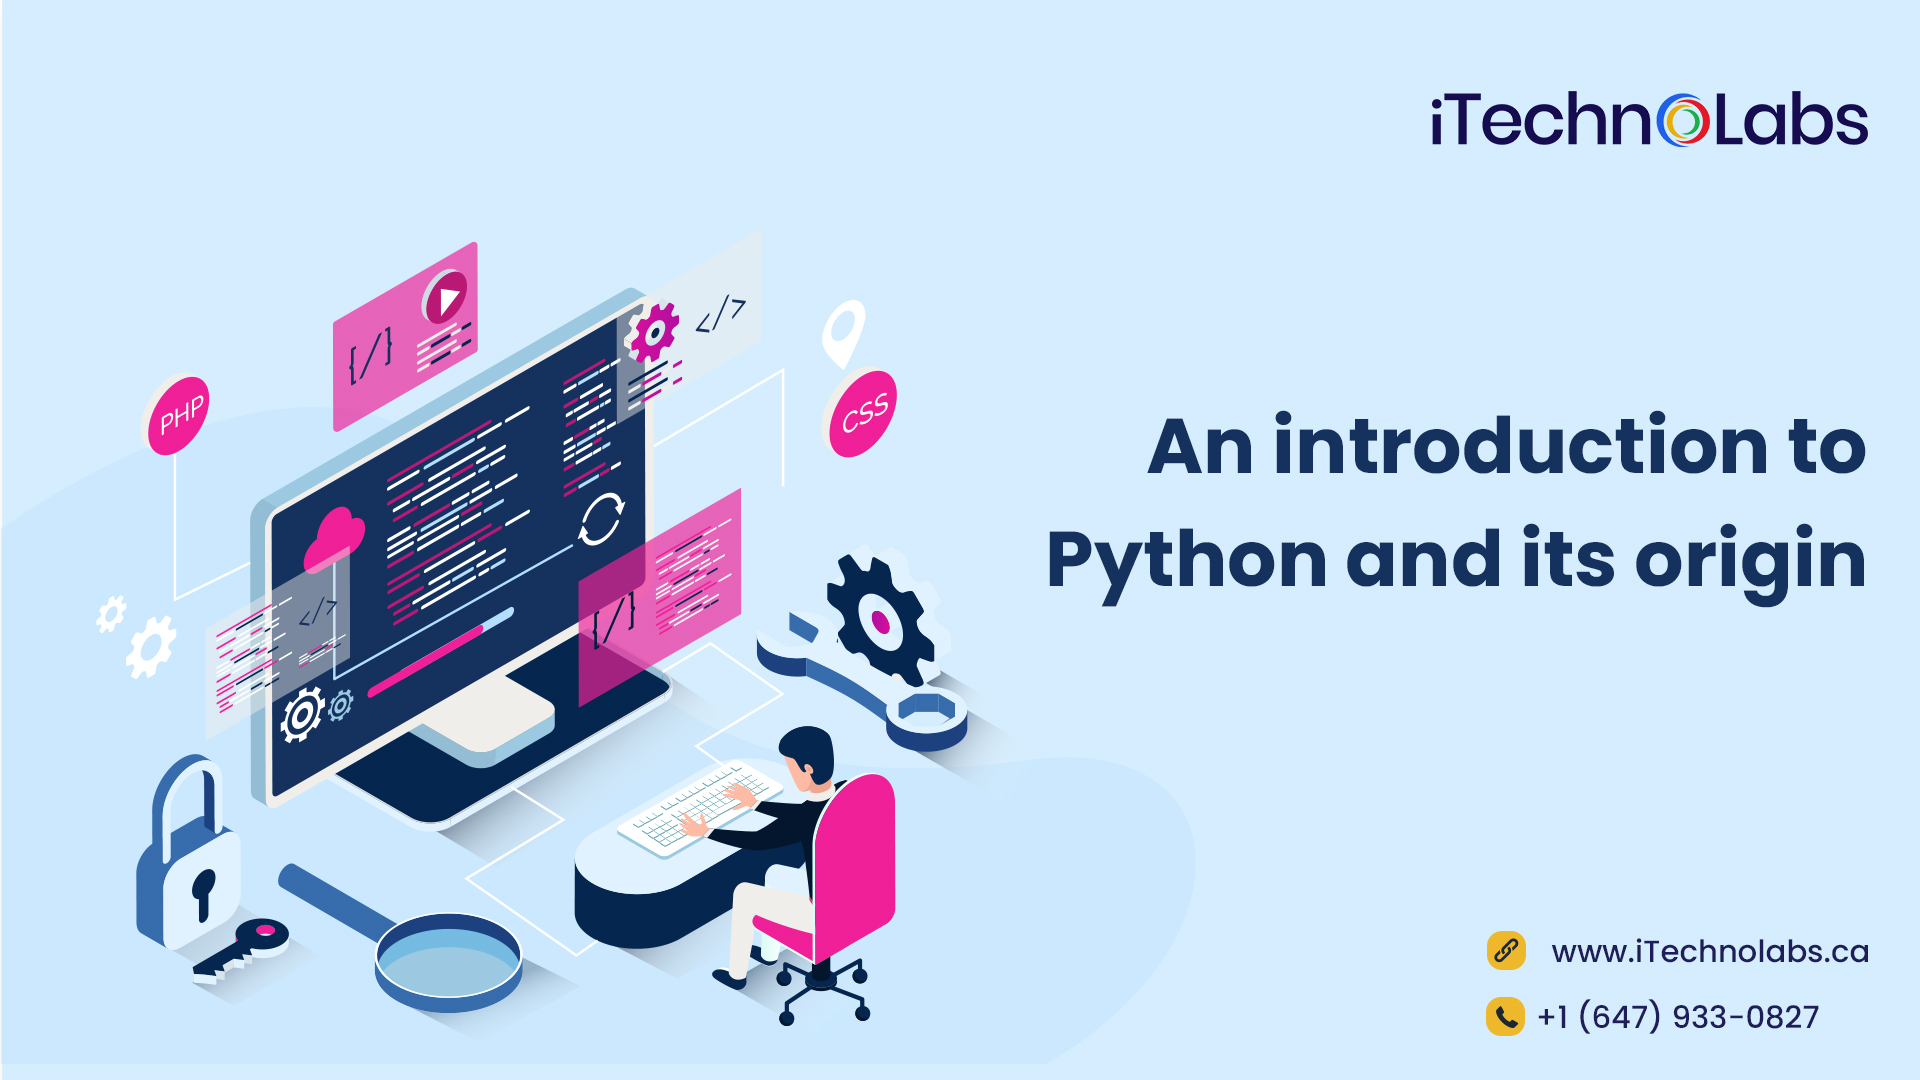 an introduction to python and its origin itechnolabs